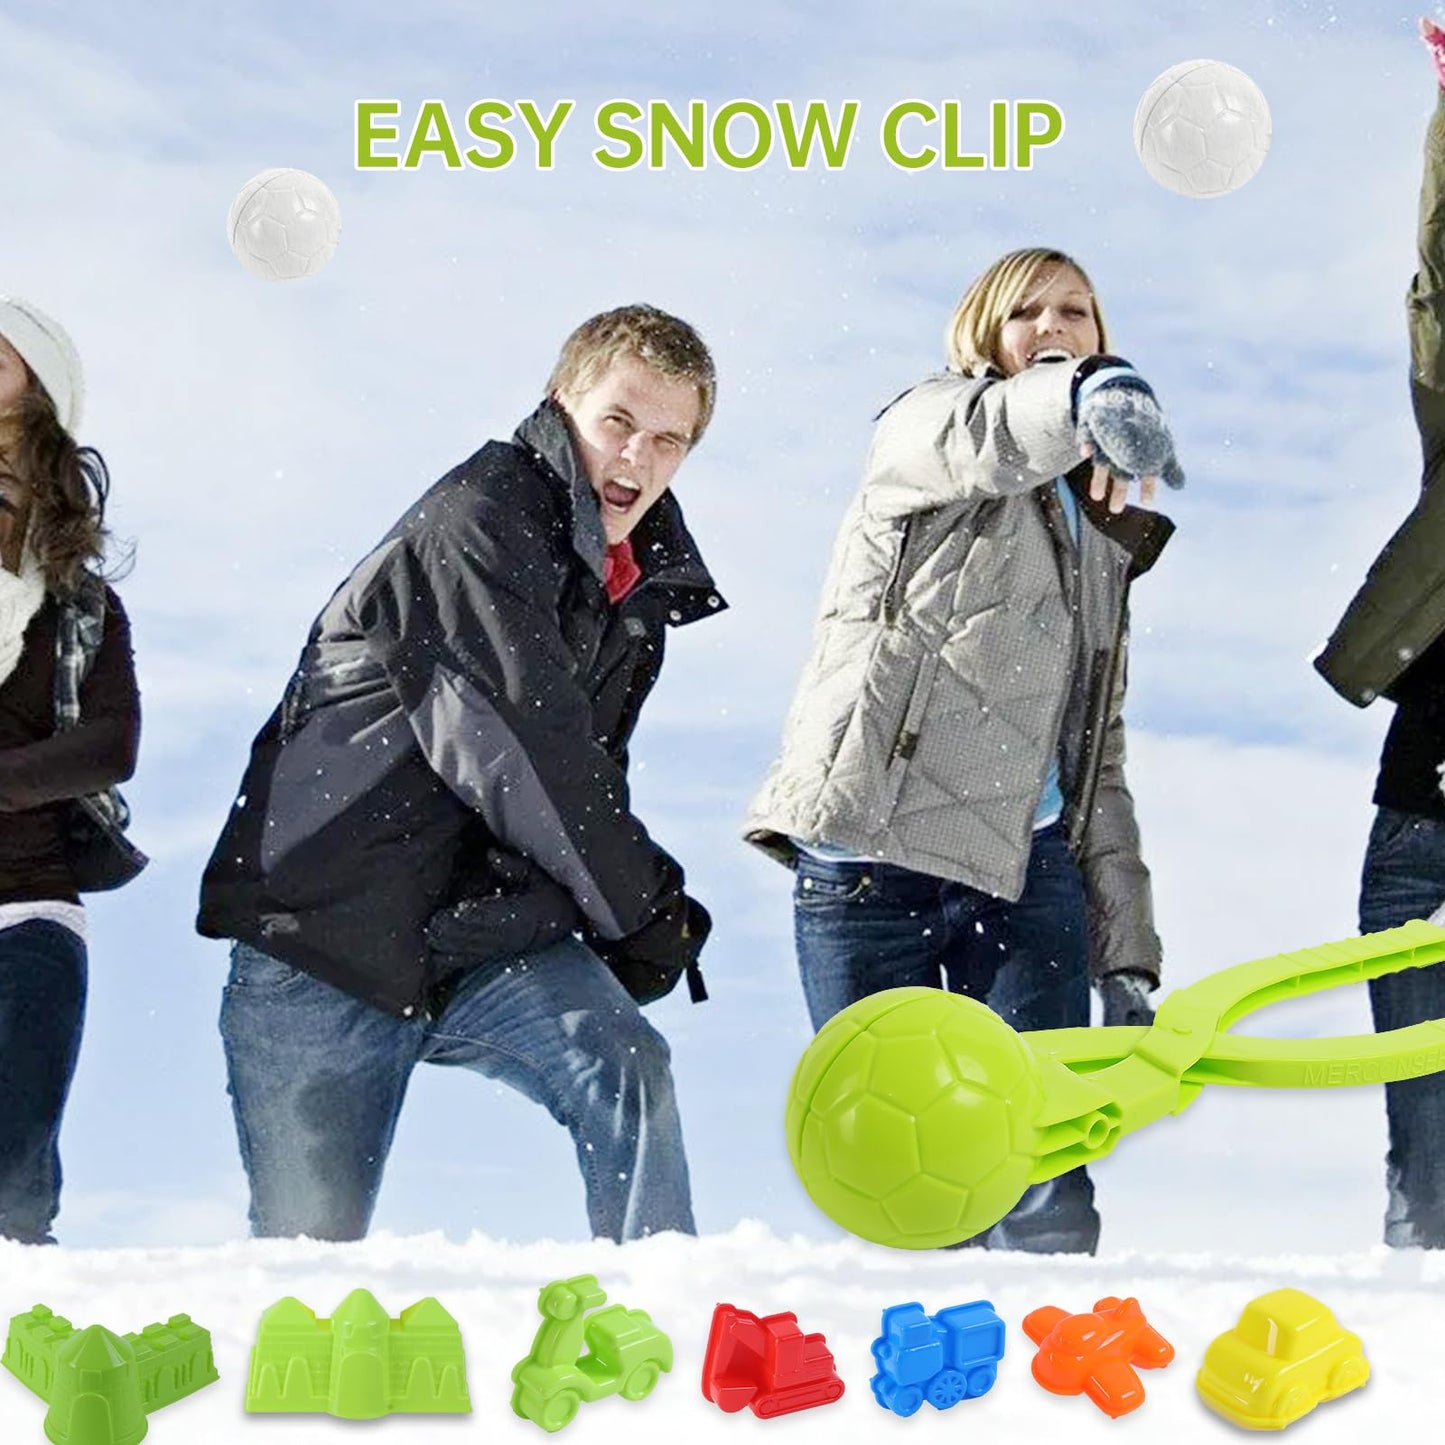 LBAIBB 16Pcs Snow Ball Makers Toys with Handle for Boys Girls of Duck Penguin Snowman for Kids Adults Outdoor Winter Snow Toys Kit with Storage Bag Maker Tool Winter Snow Toys Kit